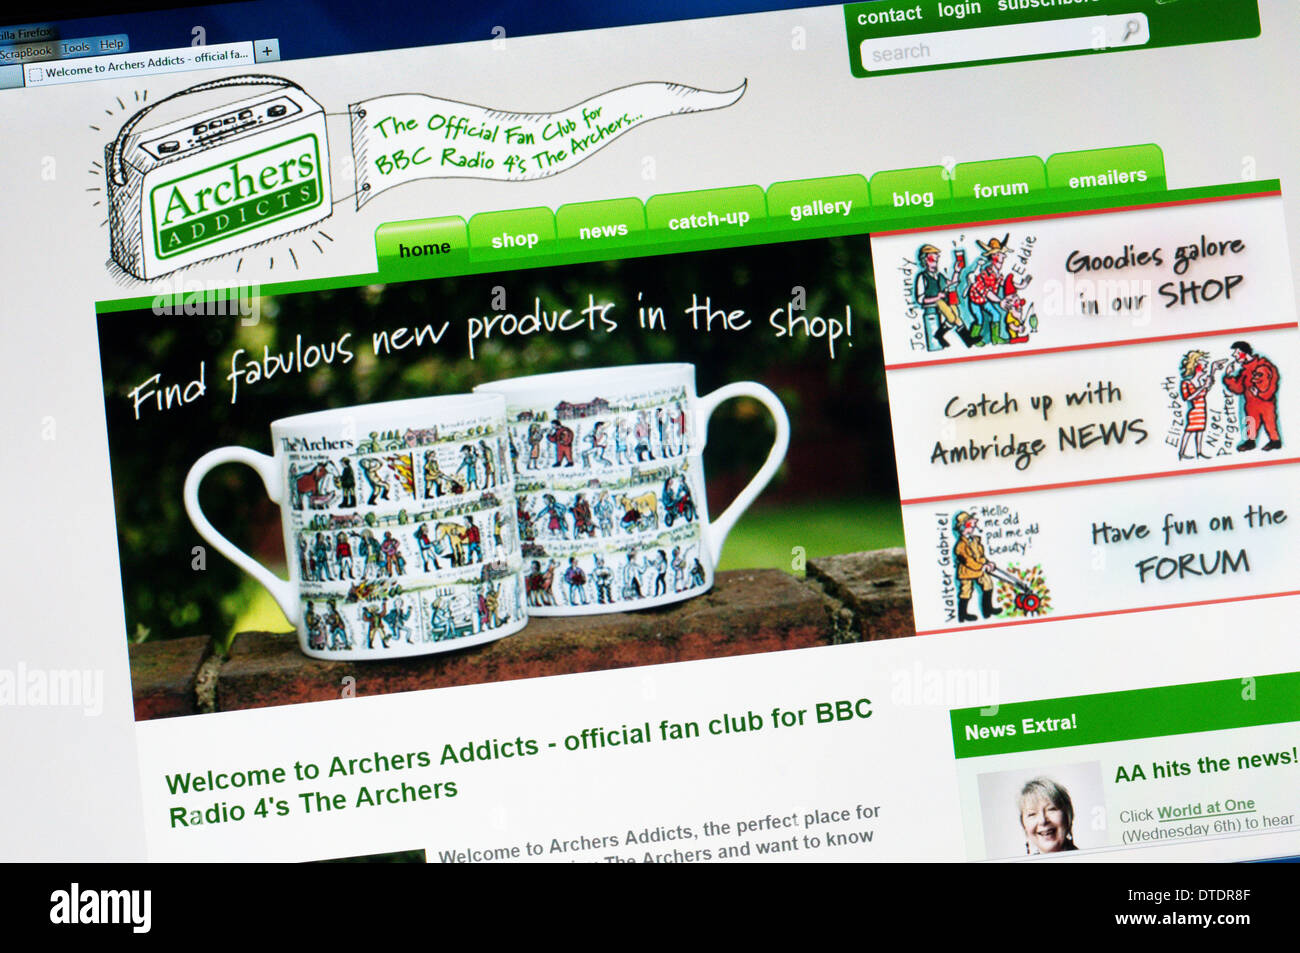 The home page of the Archers Addicts website - the official fan club for the BBC Radio 4 soap opera The Archers. Stock Photo